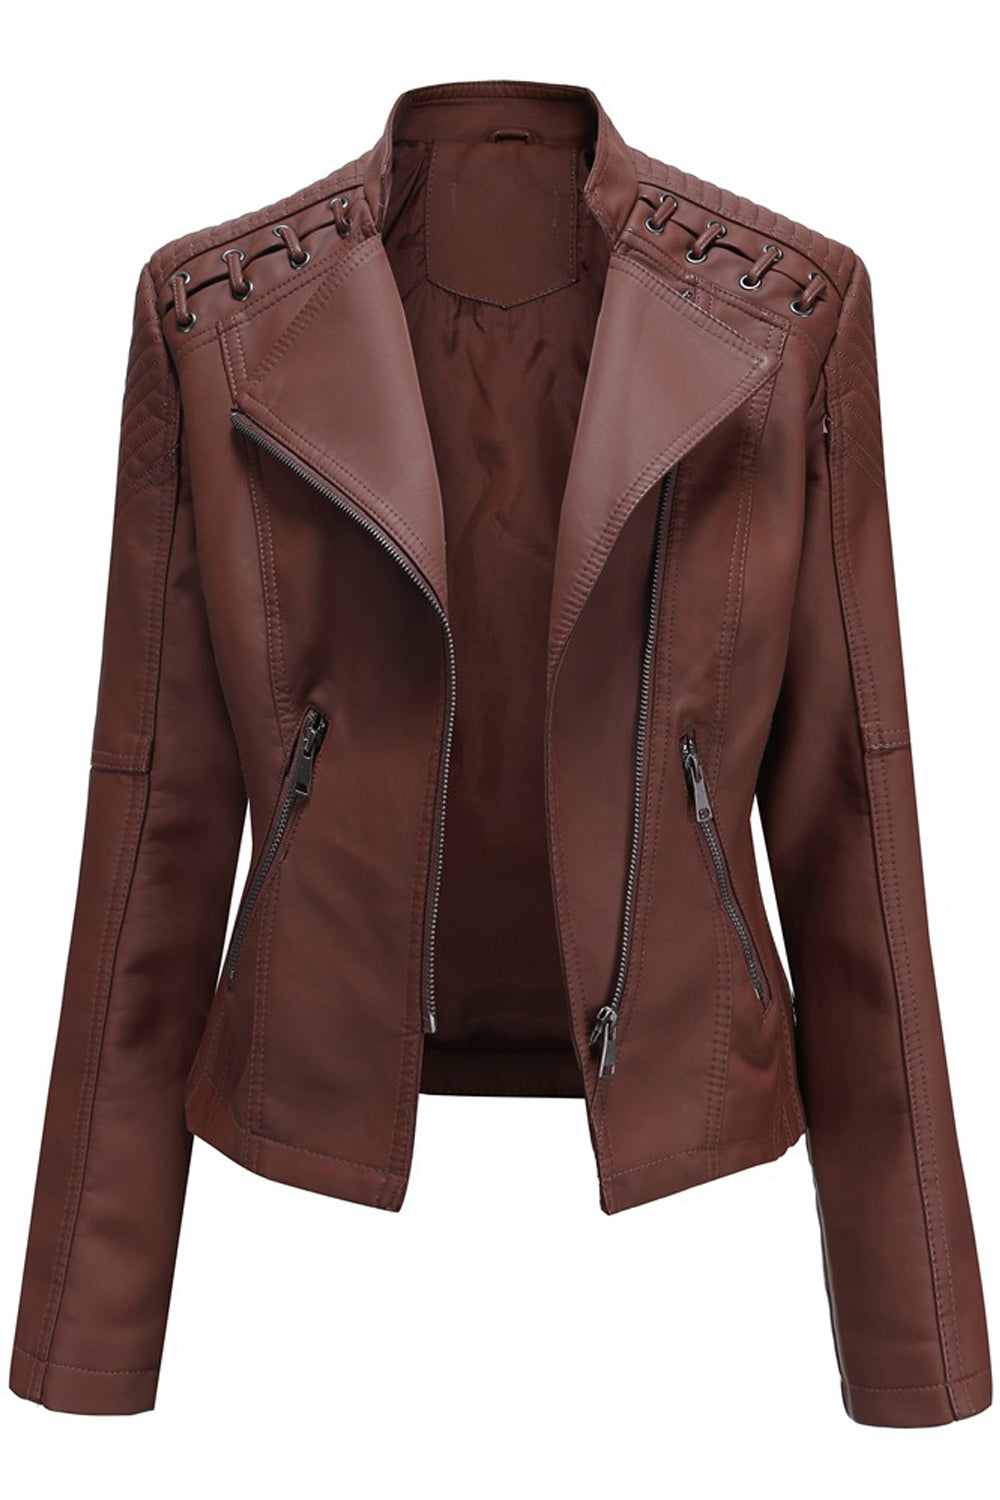 Women Convenient Solid Colored Long Sleeve Warm Leather Jacket - WJK89480